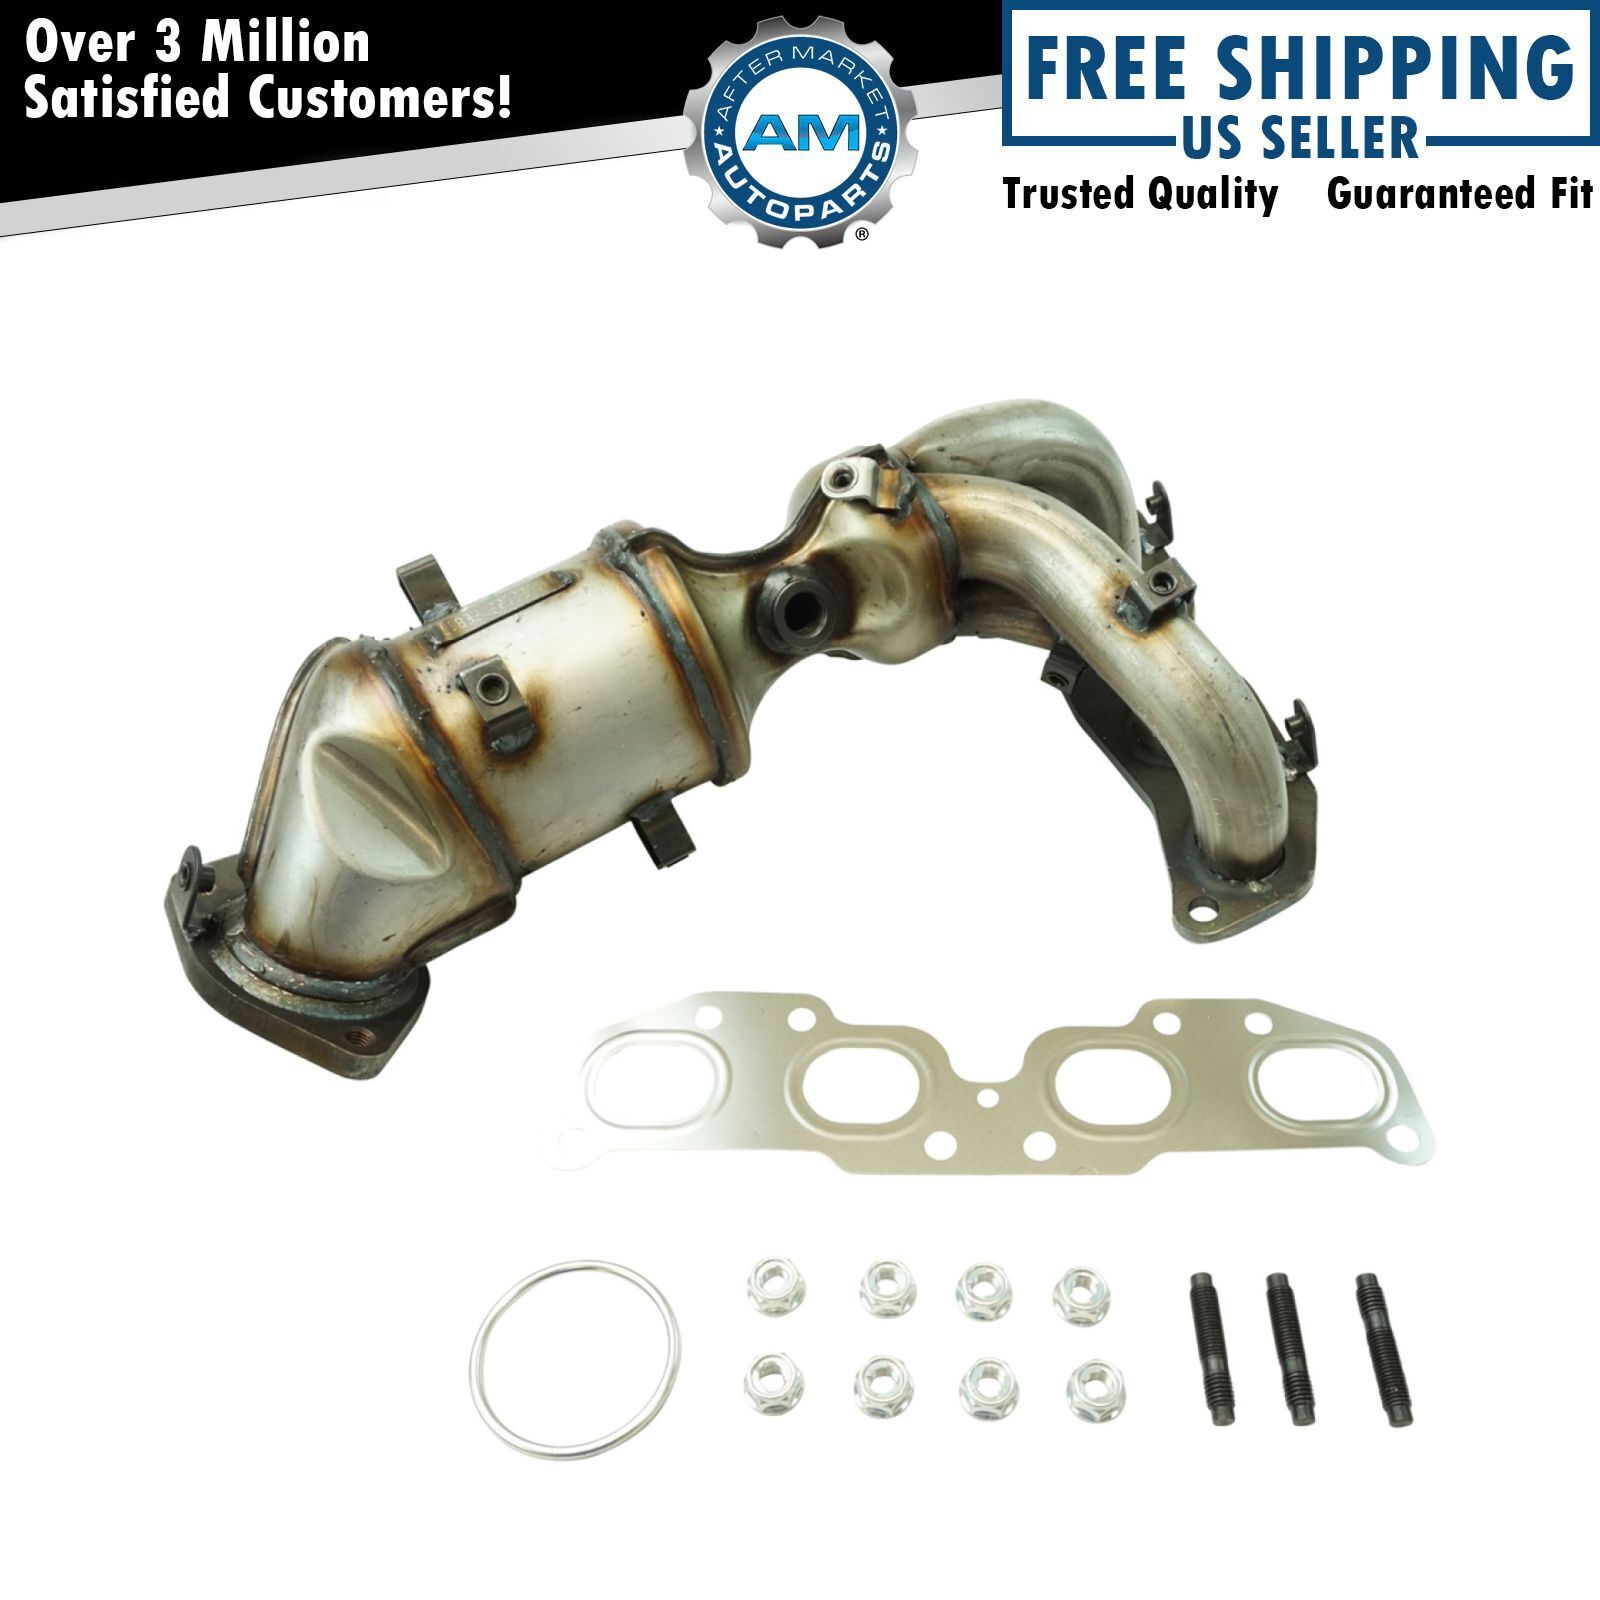 Engine Exhaust Manifold w/ Catalytic Converter Gaskets & Hardware Kit for Nissan